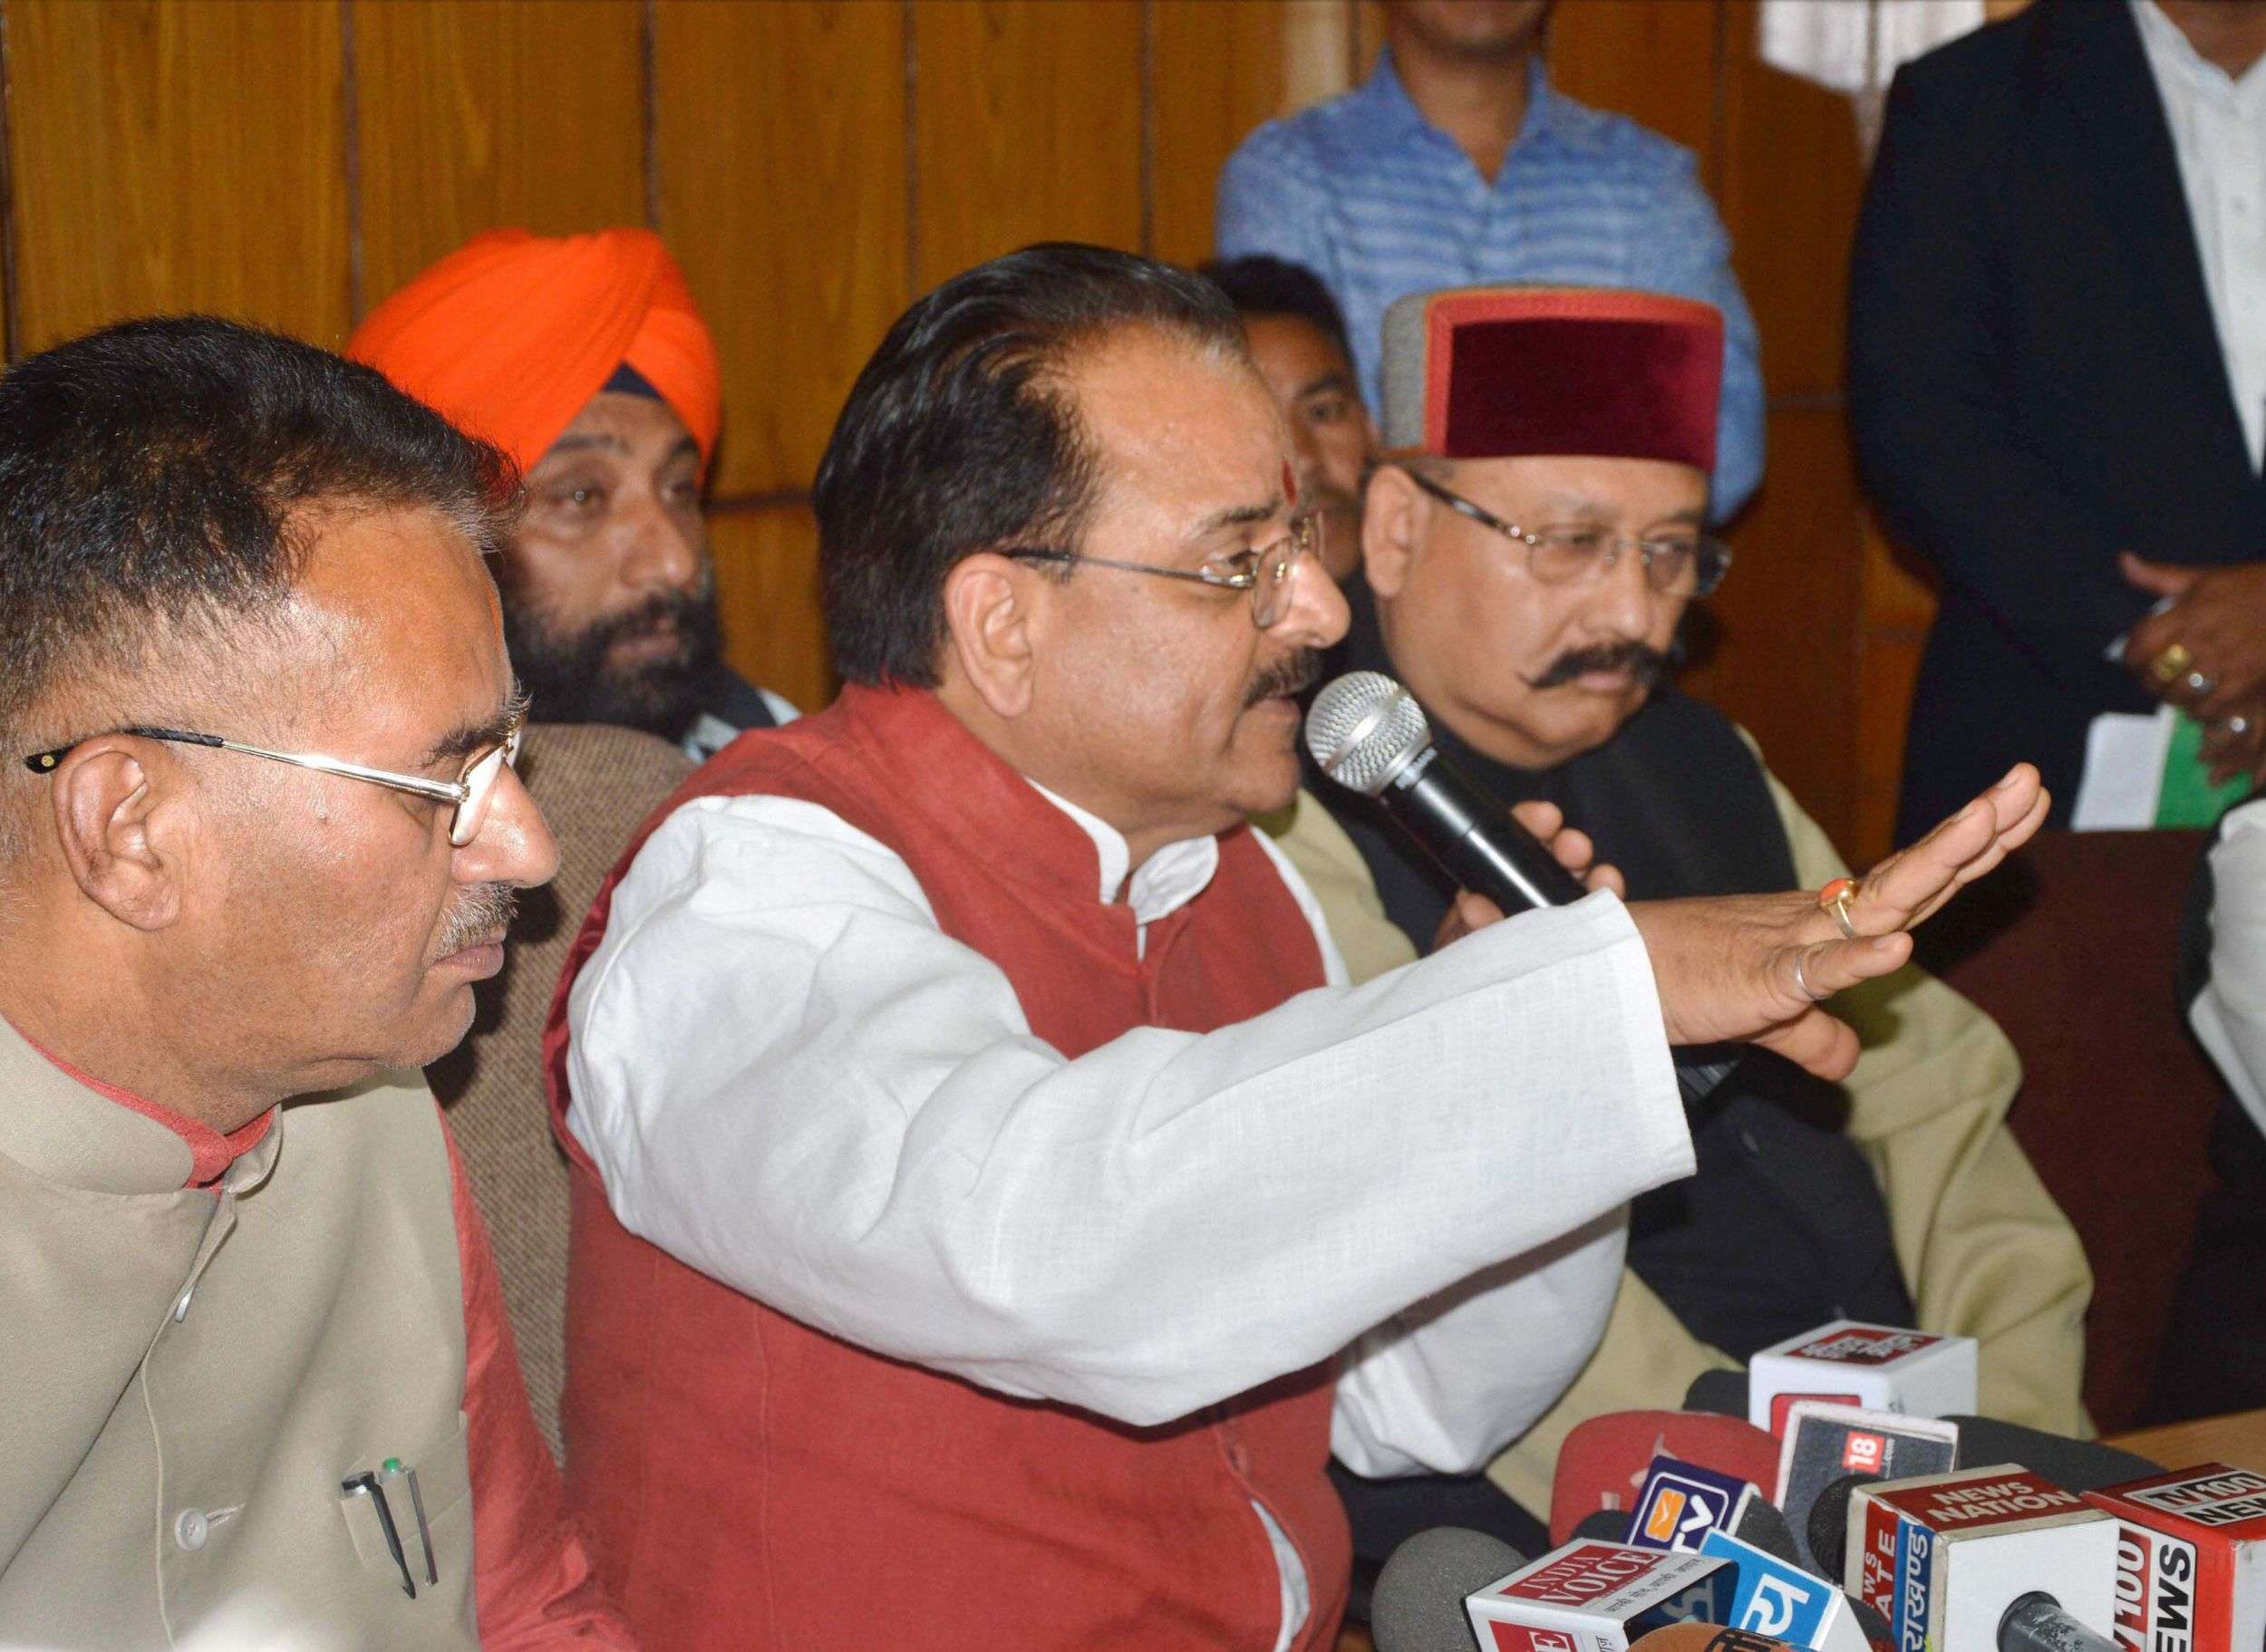 BJP member and leader of opposition in the Uttarakhand assembly Ajay Bhatt addressing a news conference. (PTI photo)